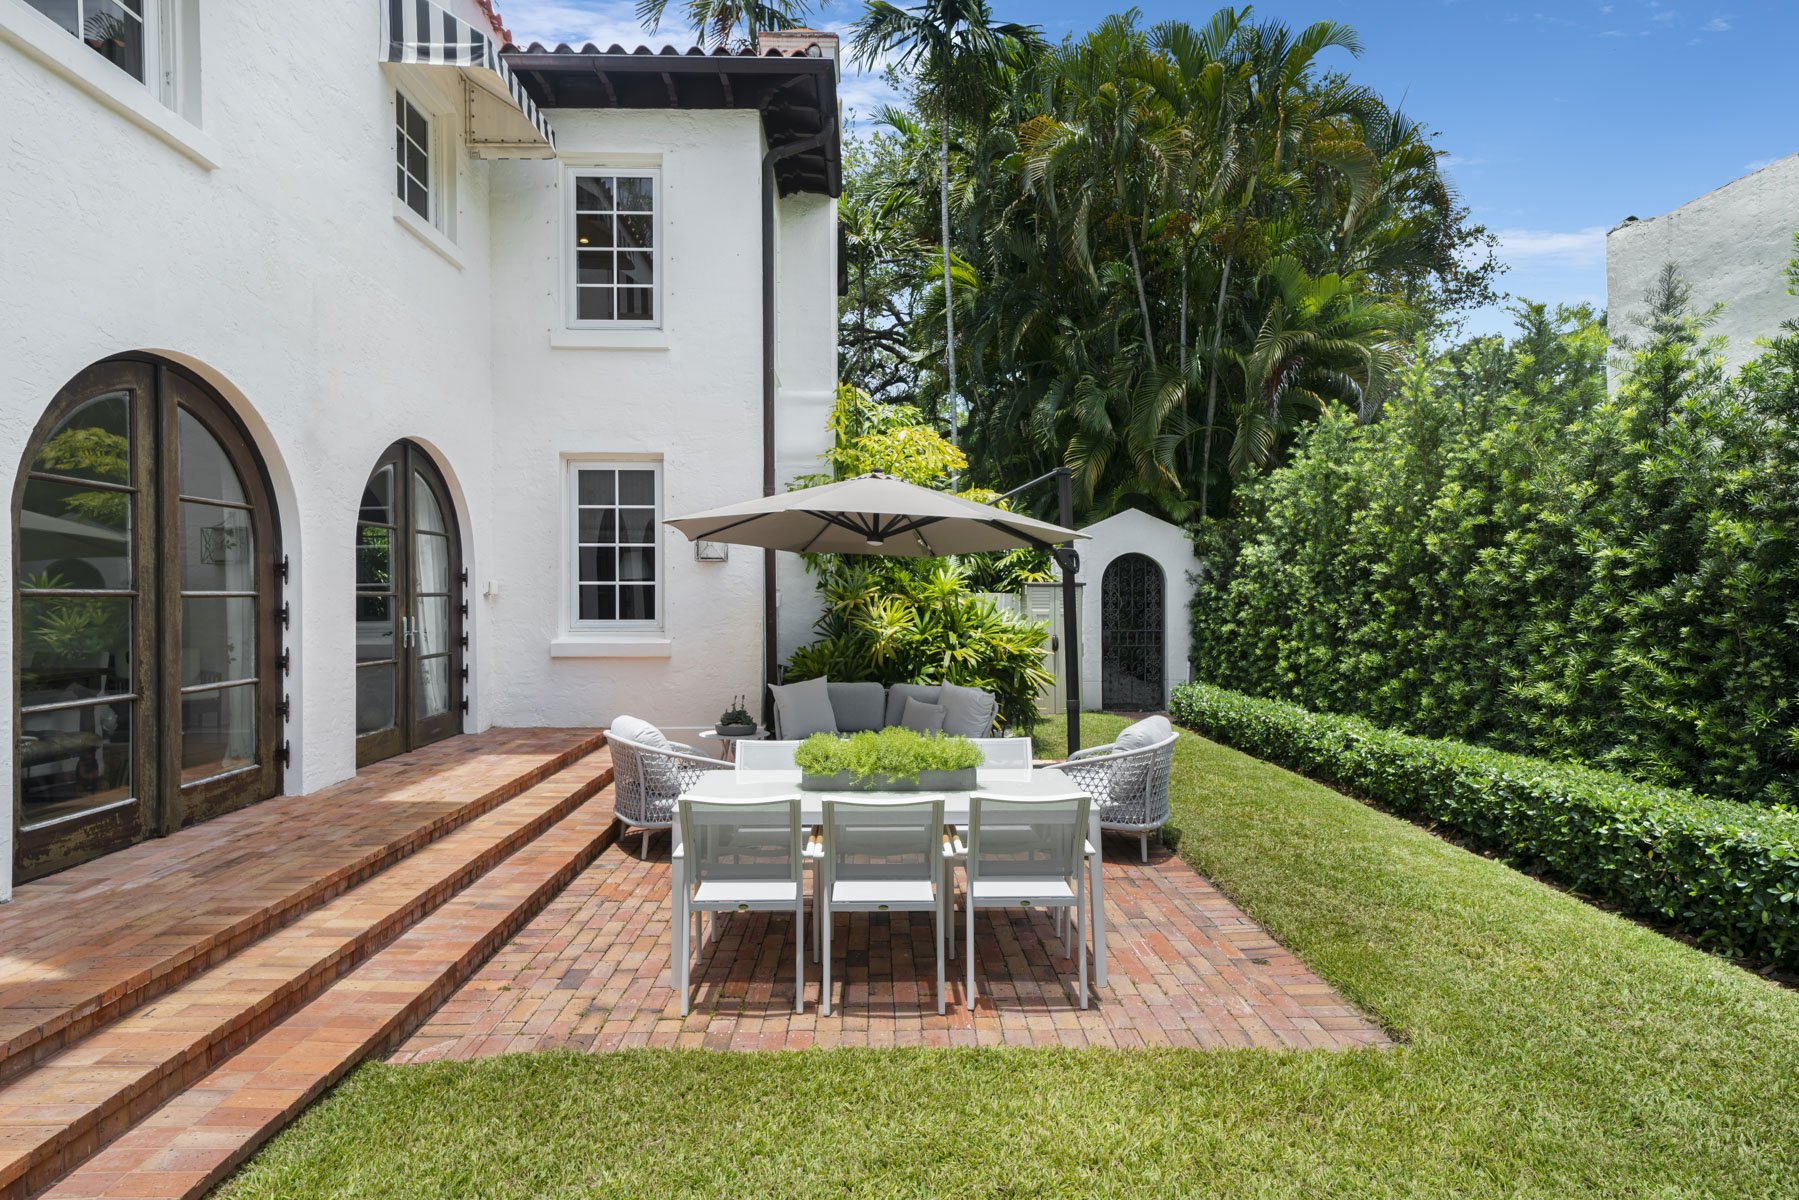 Actor And Producer Christian Slater Sells Classic Coconut Grove Home For $4.258 Million 36.jpg